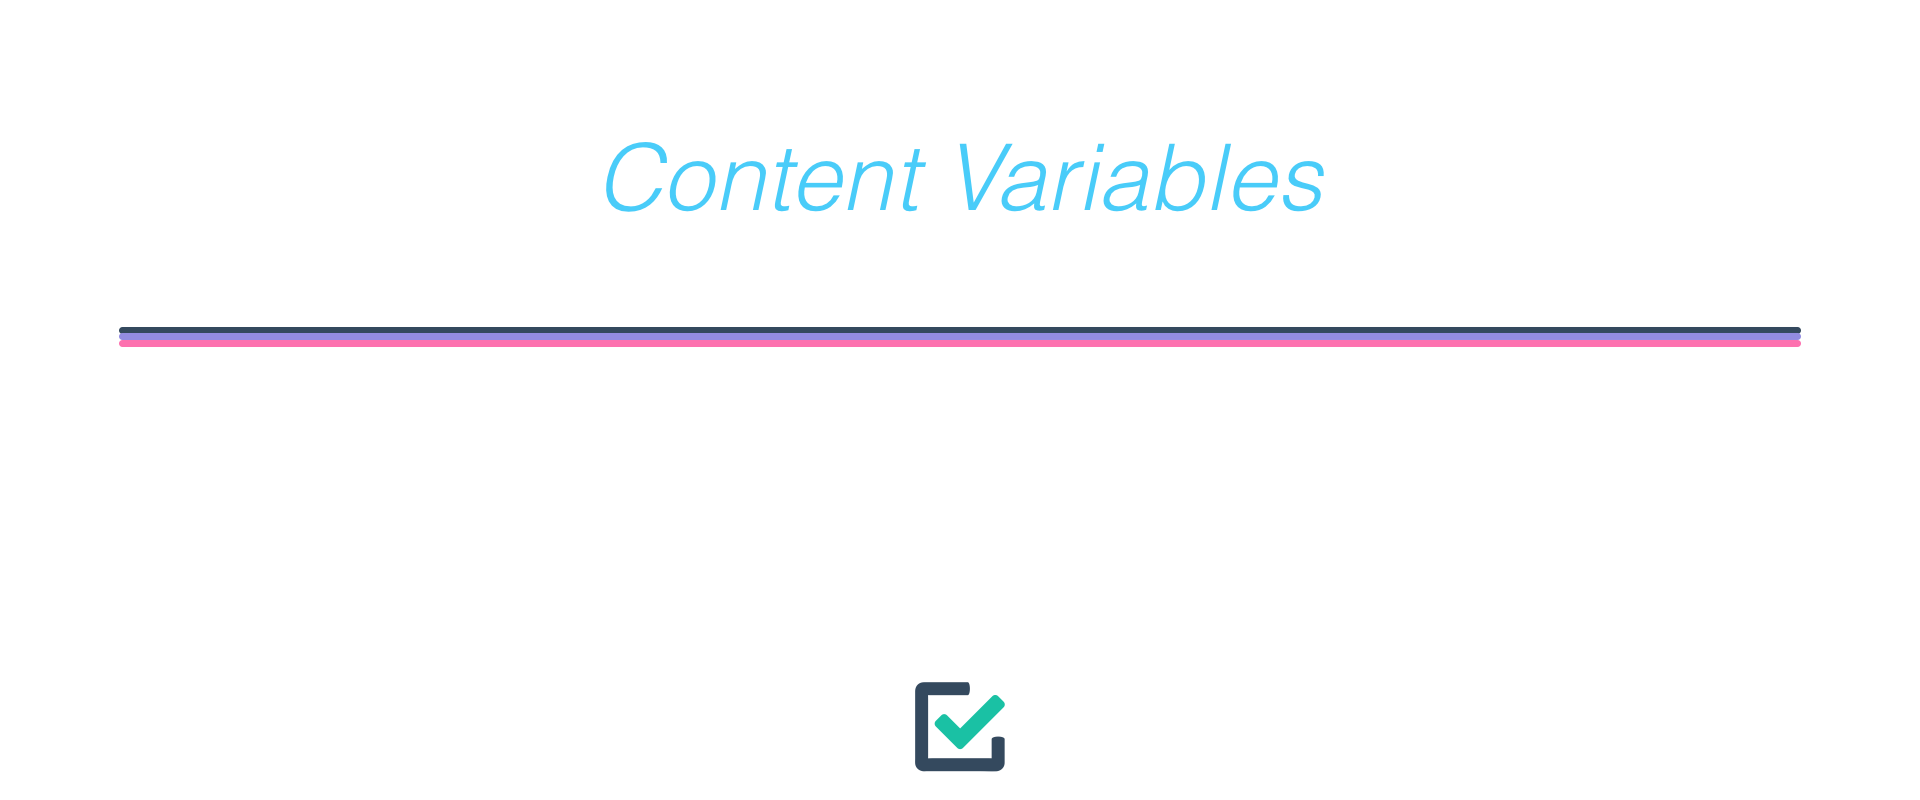 Content variables